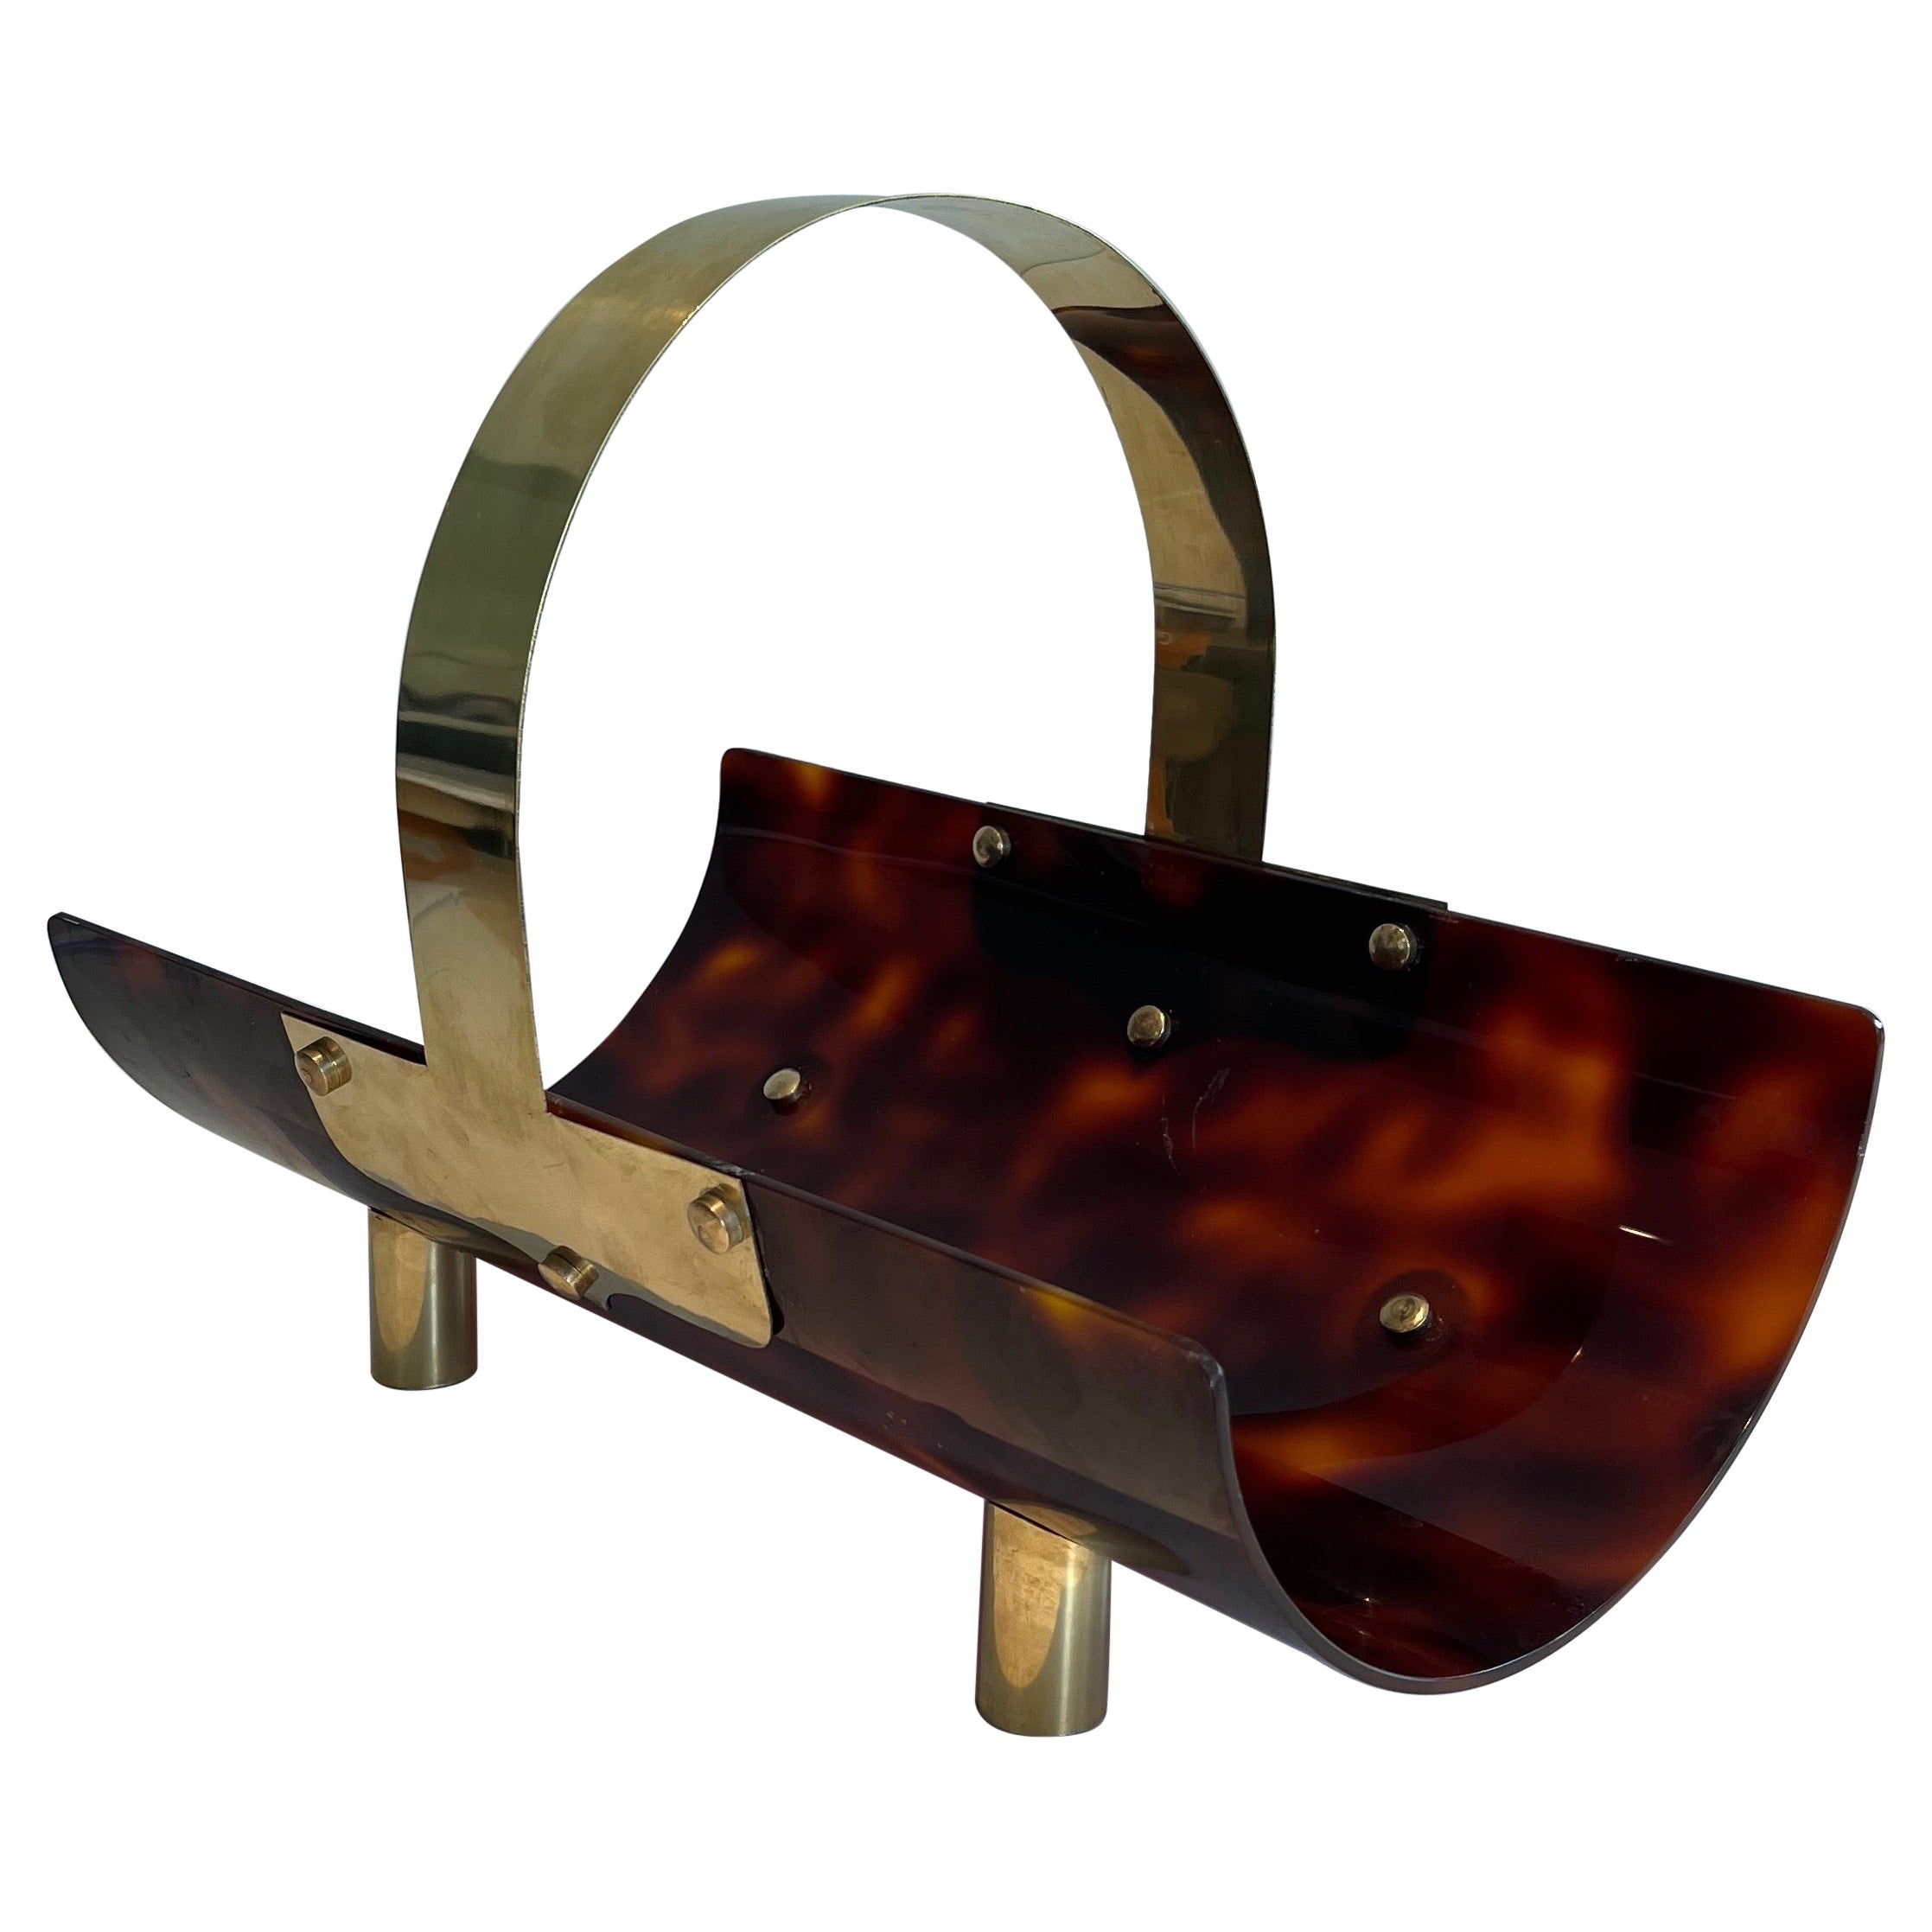 Logs Holder made of Brass and Lucite Imitating Tortoise Shell